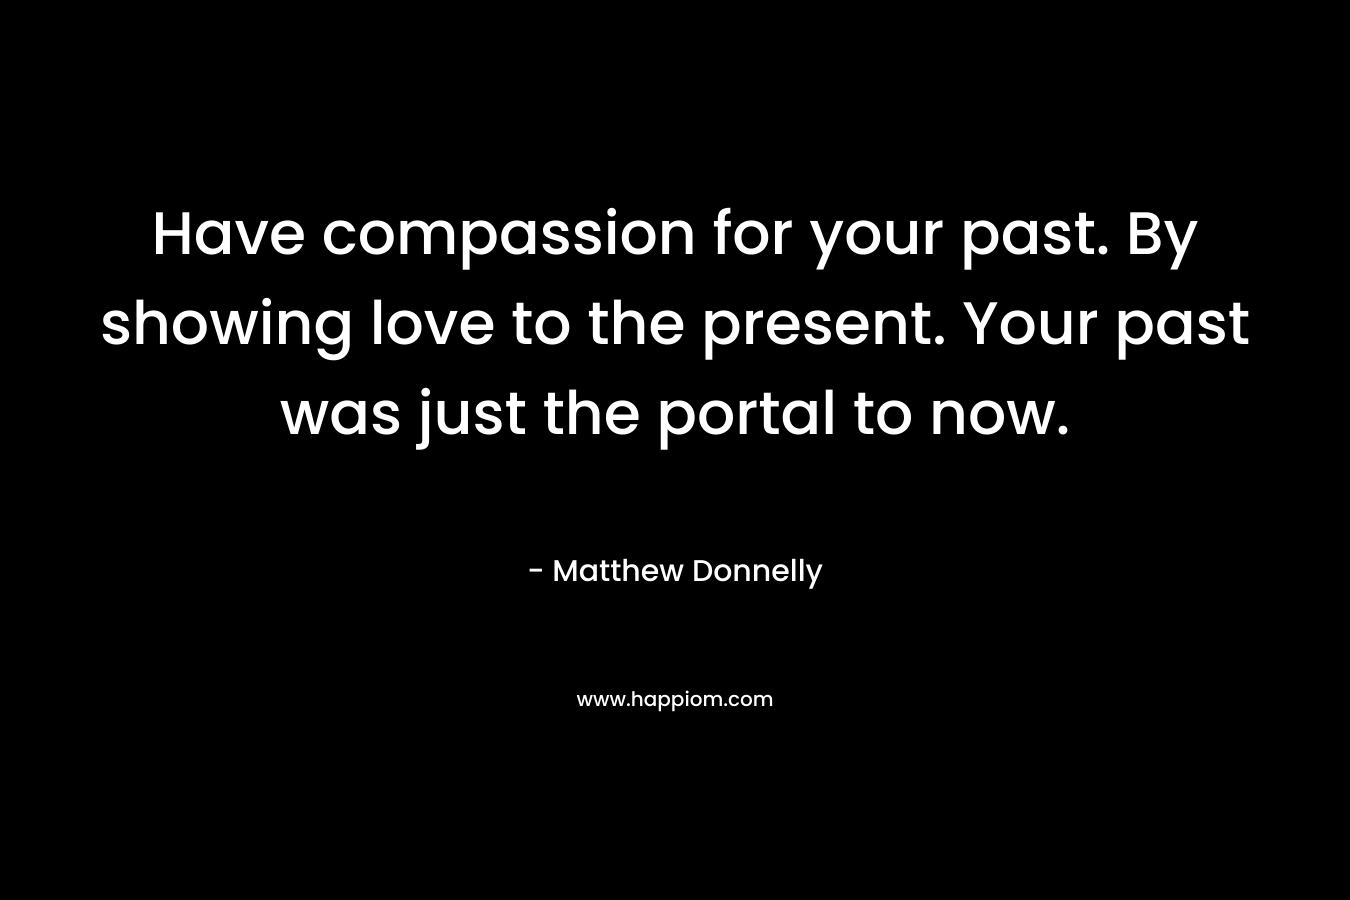 Have compassion for your past. By showing love to the present. Your past was just the portal to now.